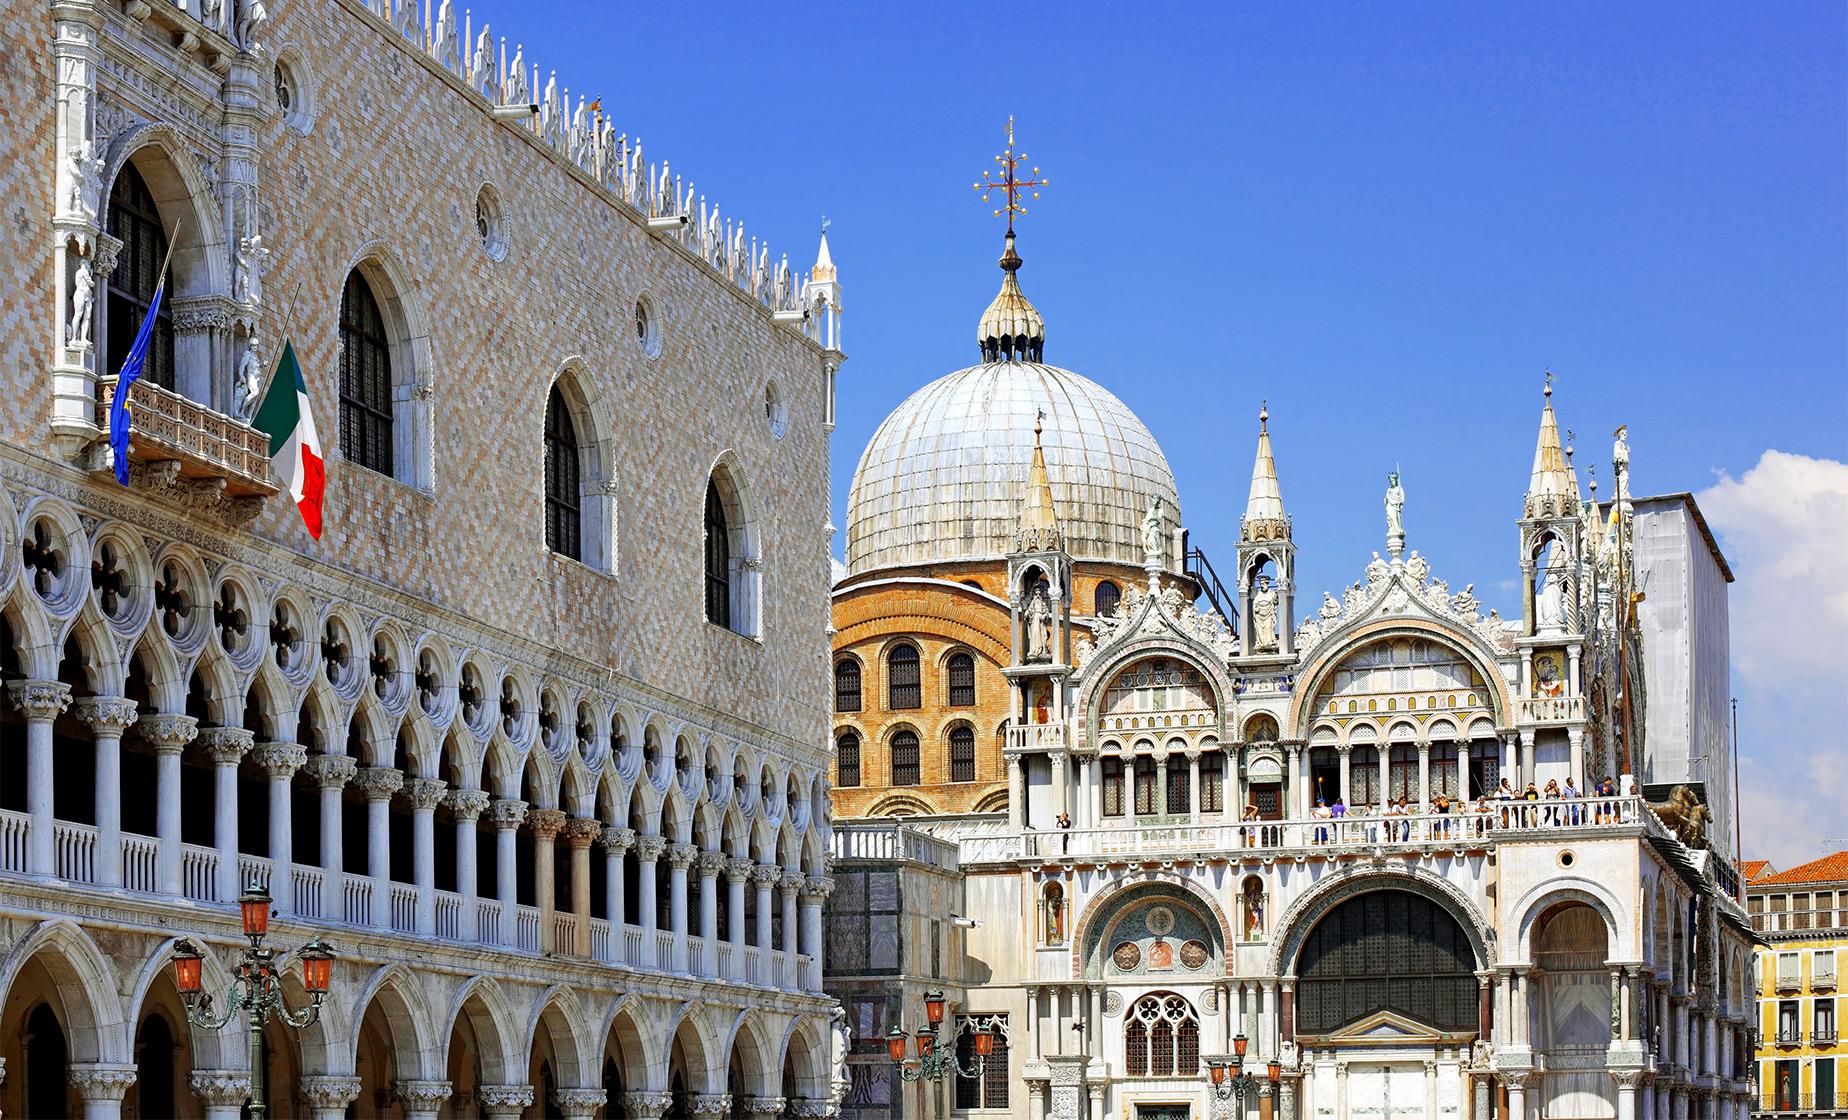 Skip-the-Line Doge's Palace and St Mark's Basilica with Guide